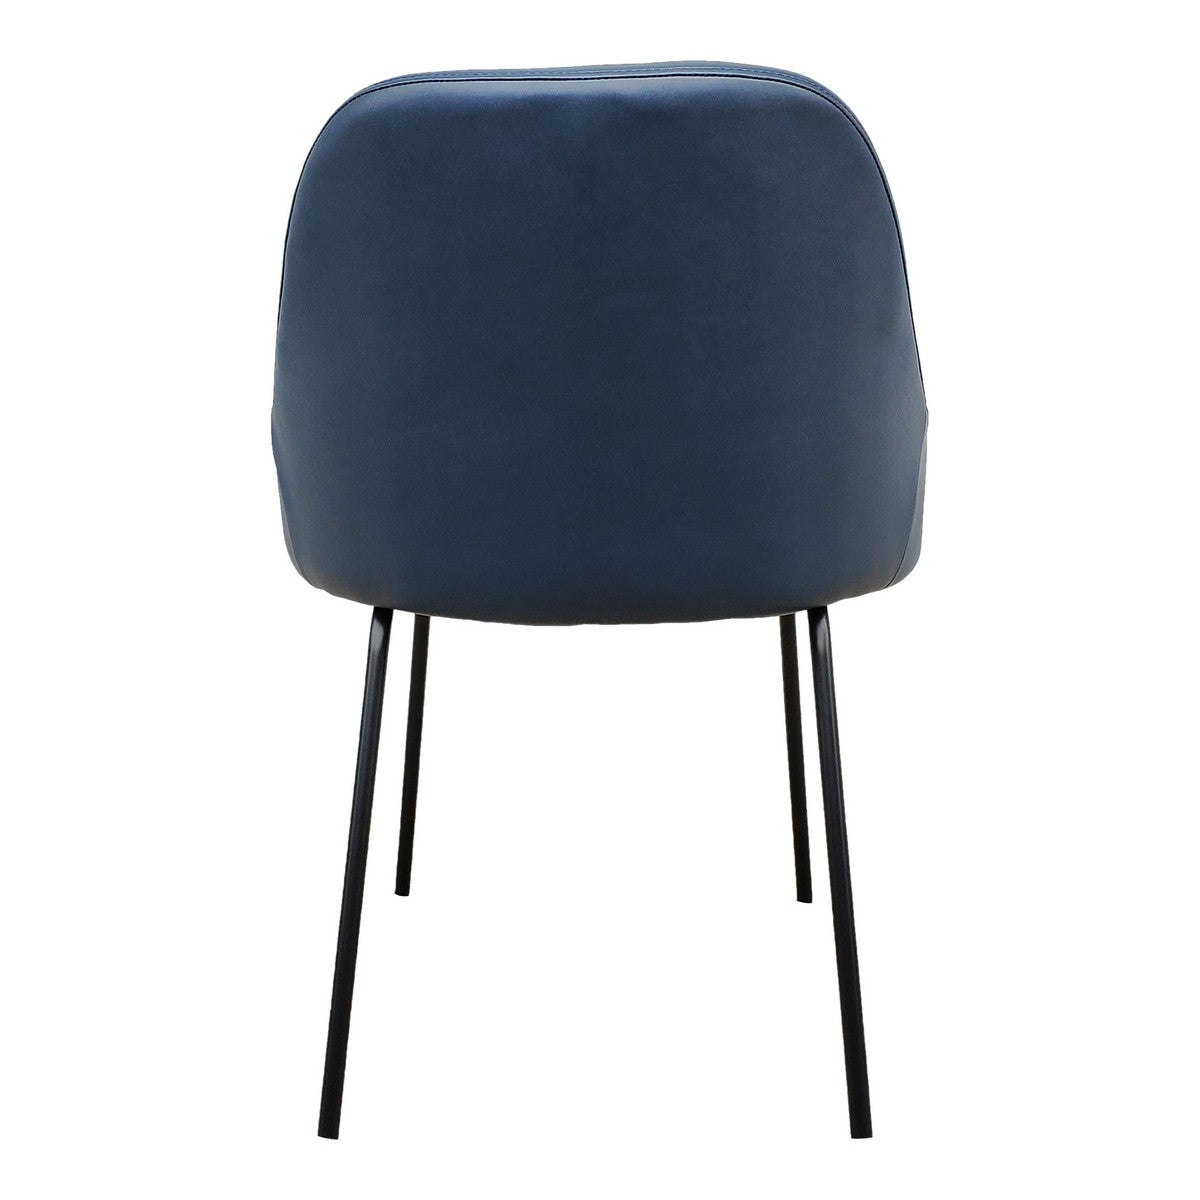 Moe's Home Collection Blaze Dining Chair Blue - FN-1035-26